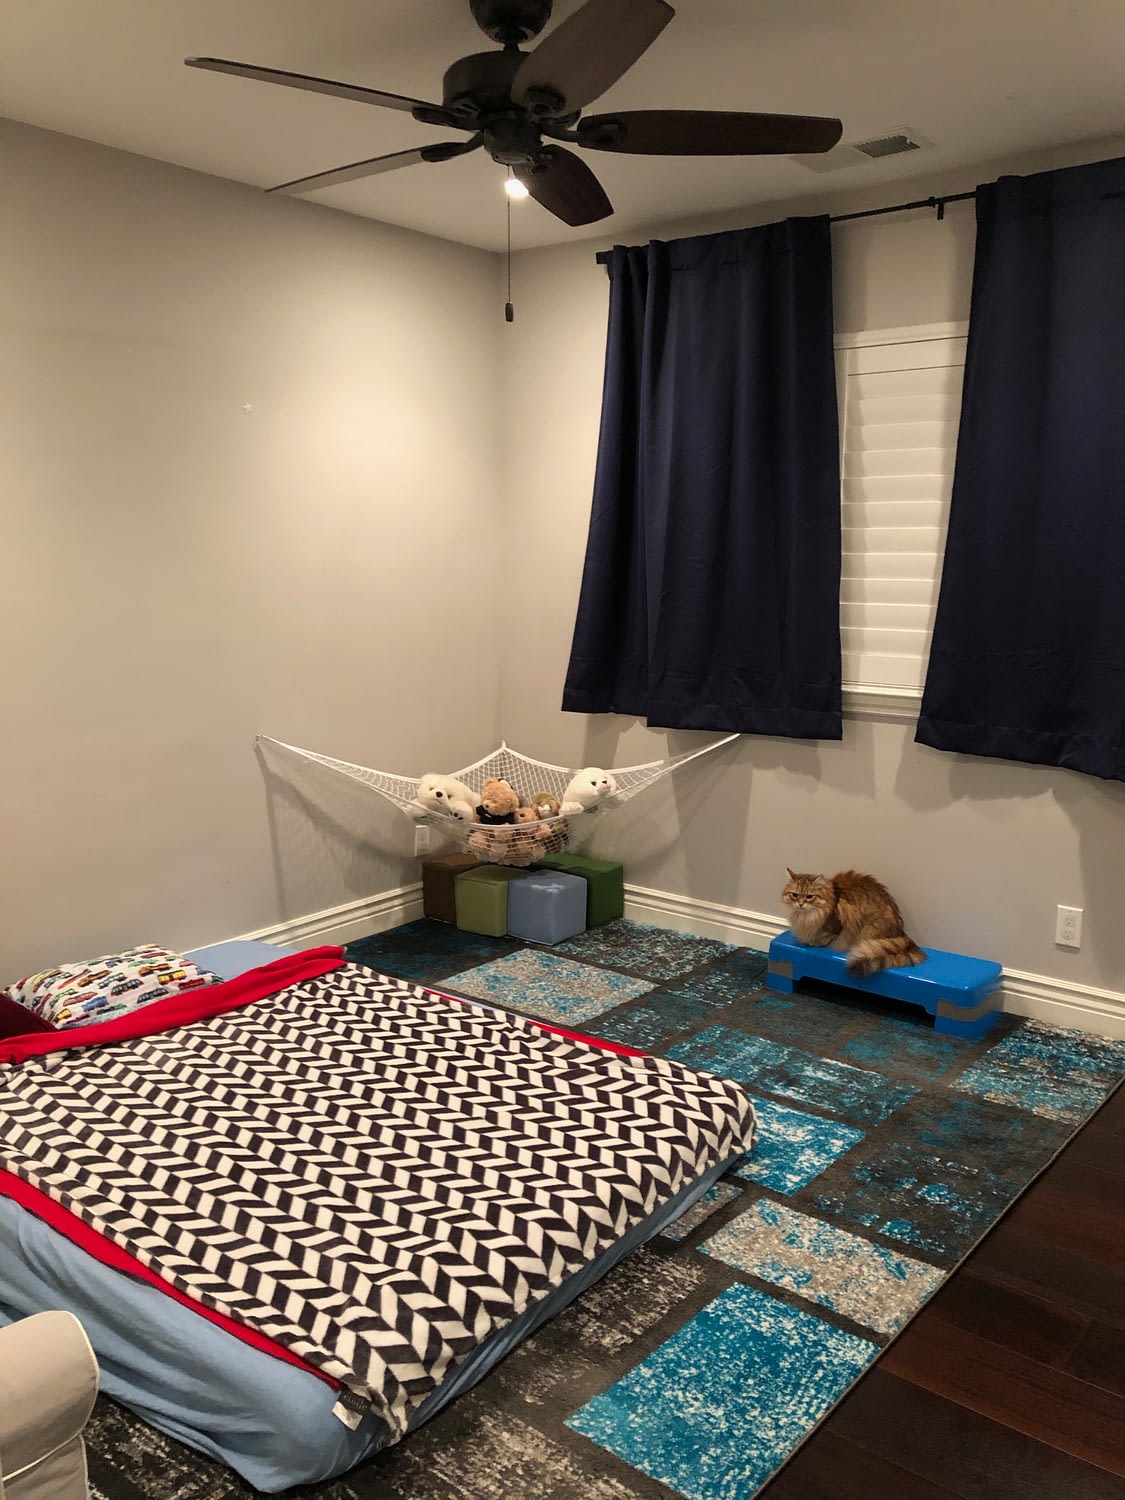 Montessori Floor Bed Transition and Toddler Bedroom - Love and Baby Steps